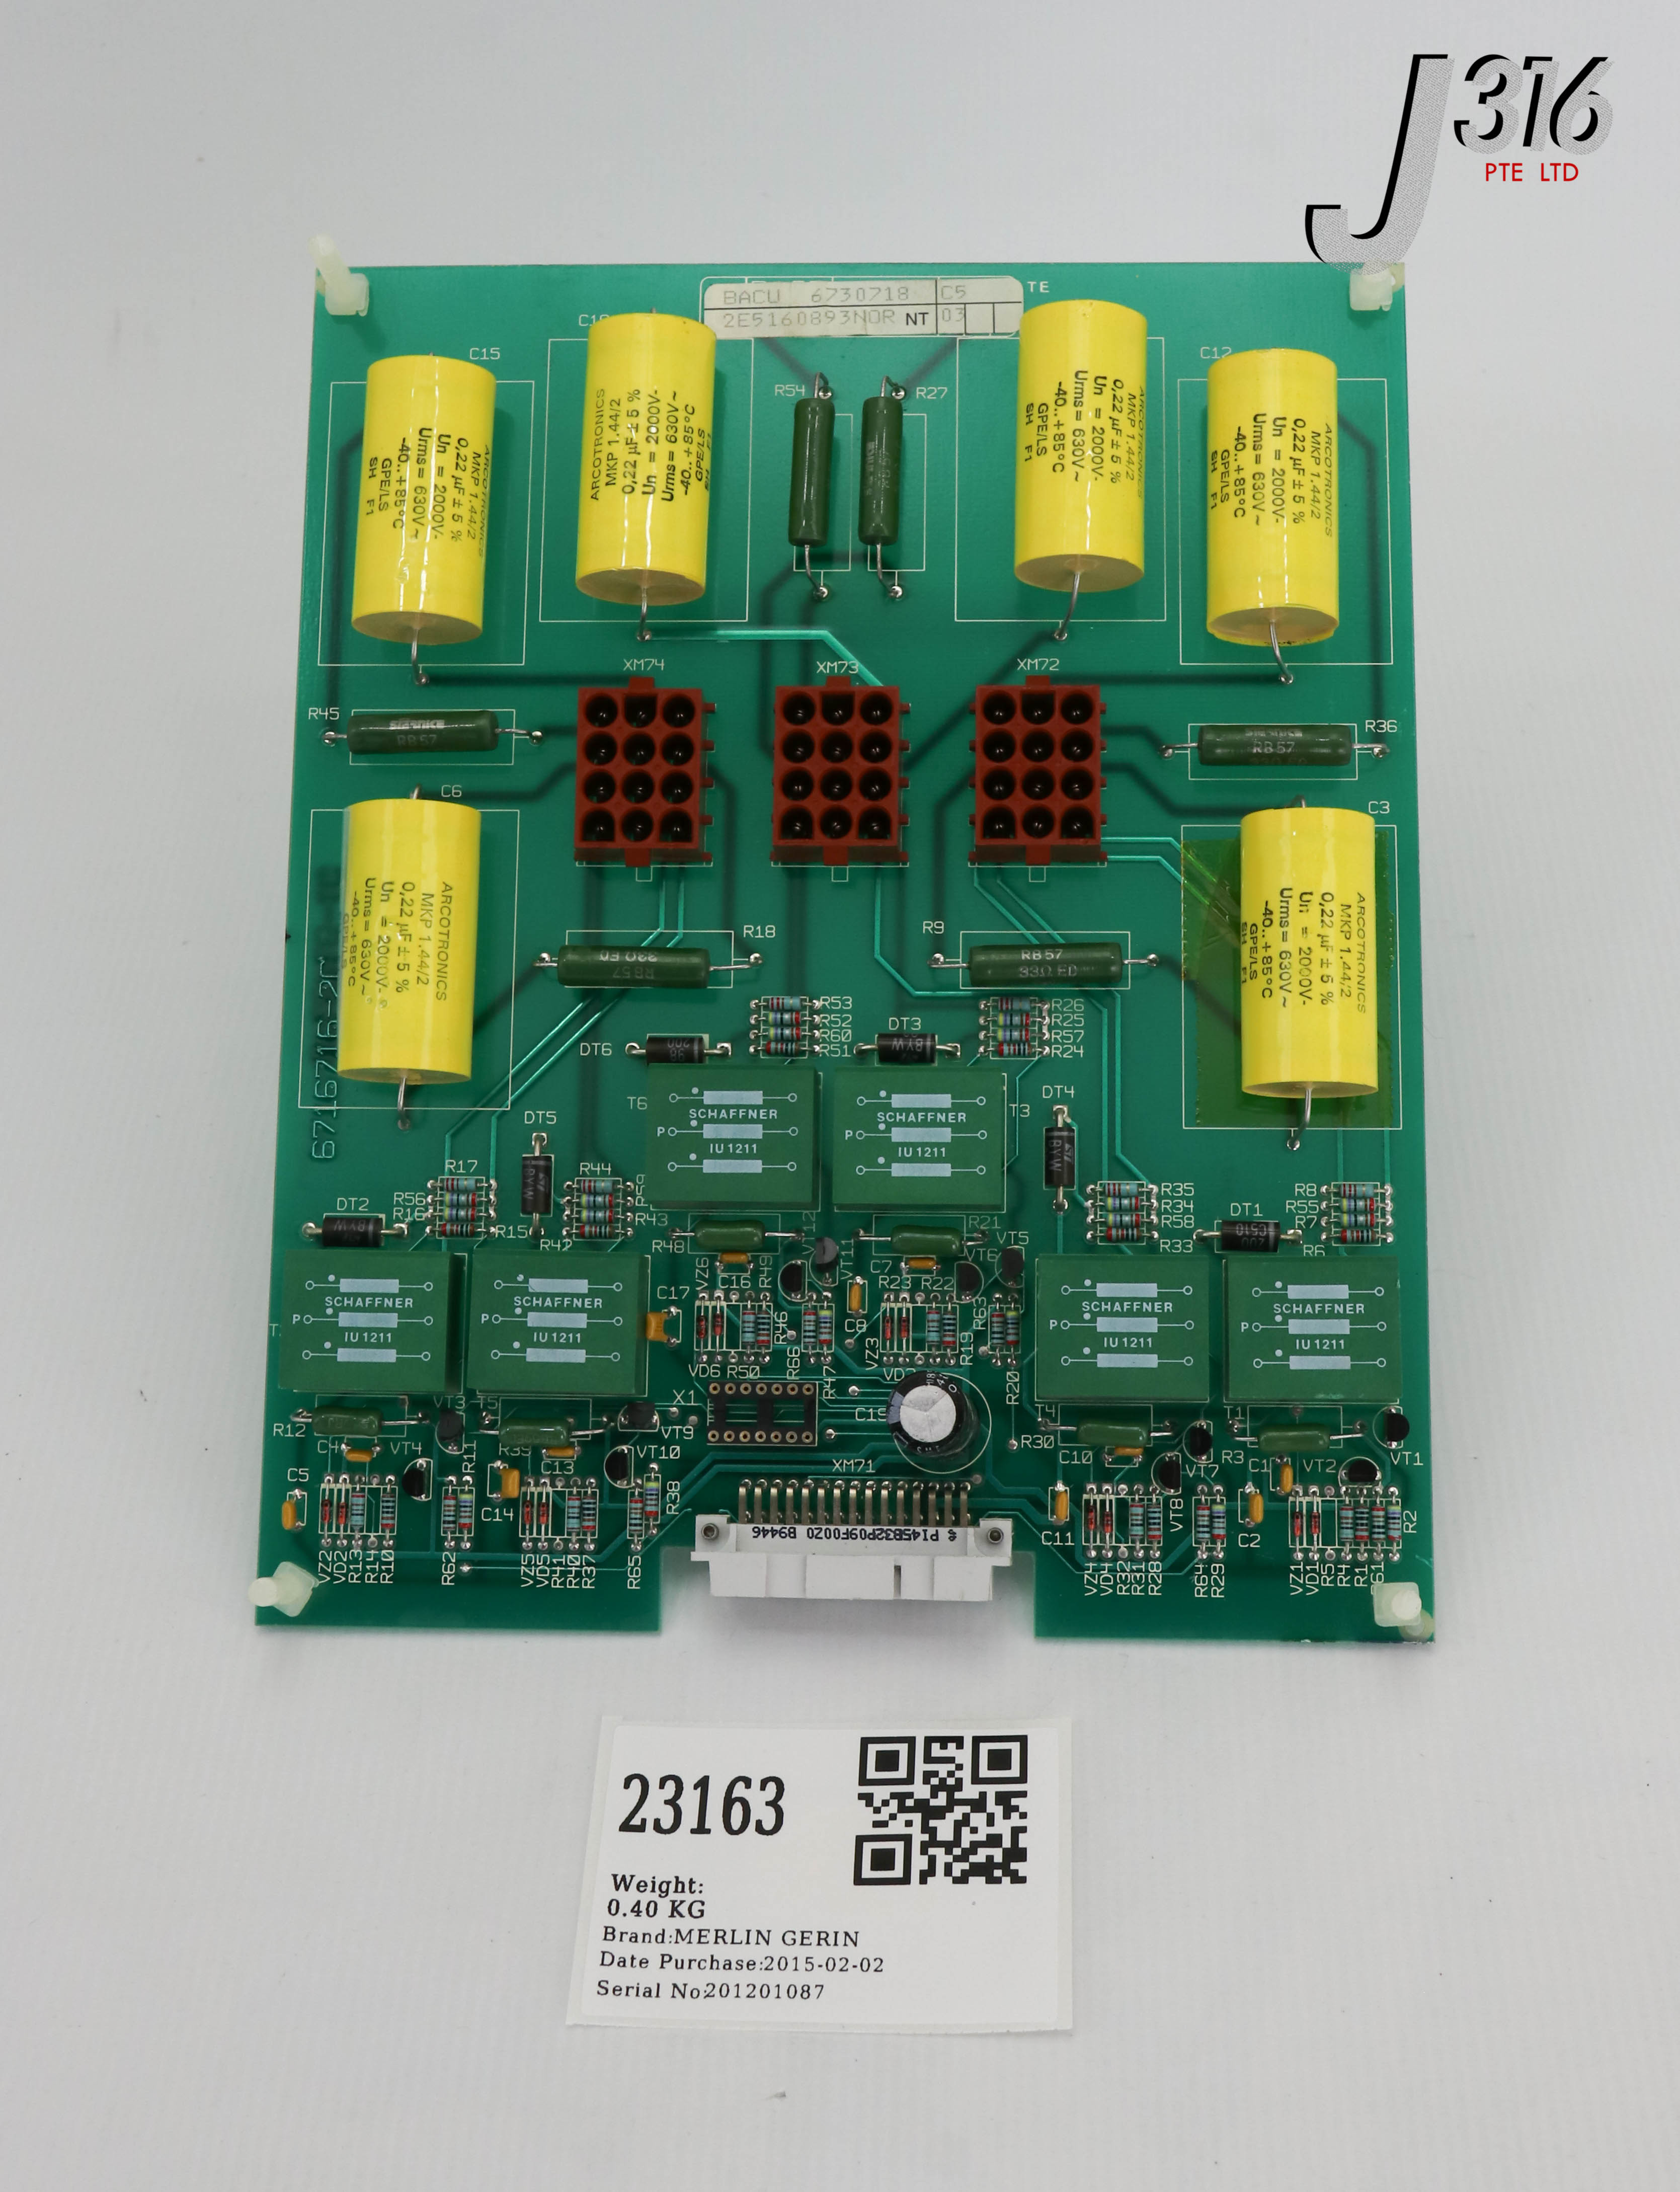 CLIP Details about   23176 MERLIN GERIN PCB 6716774 6716772-1A 